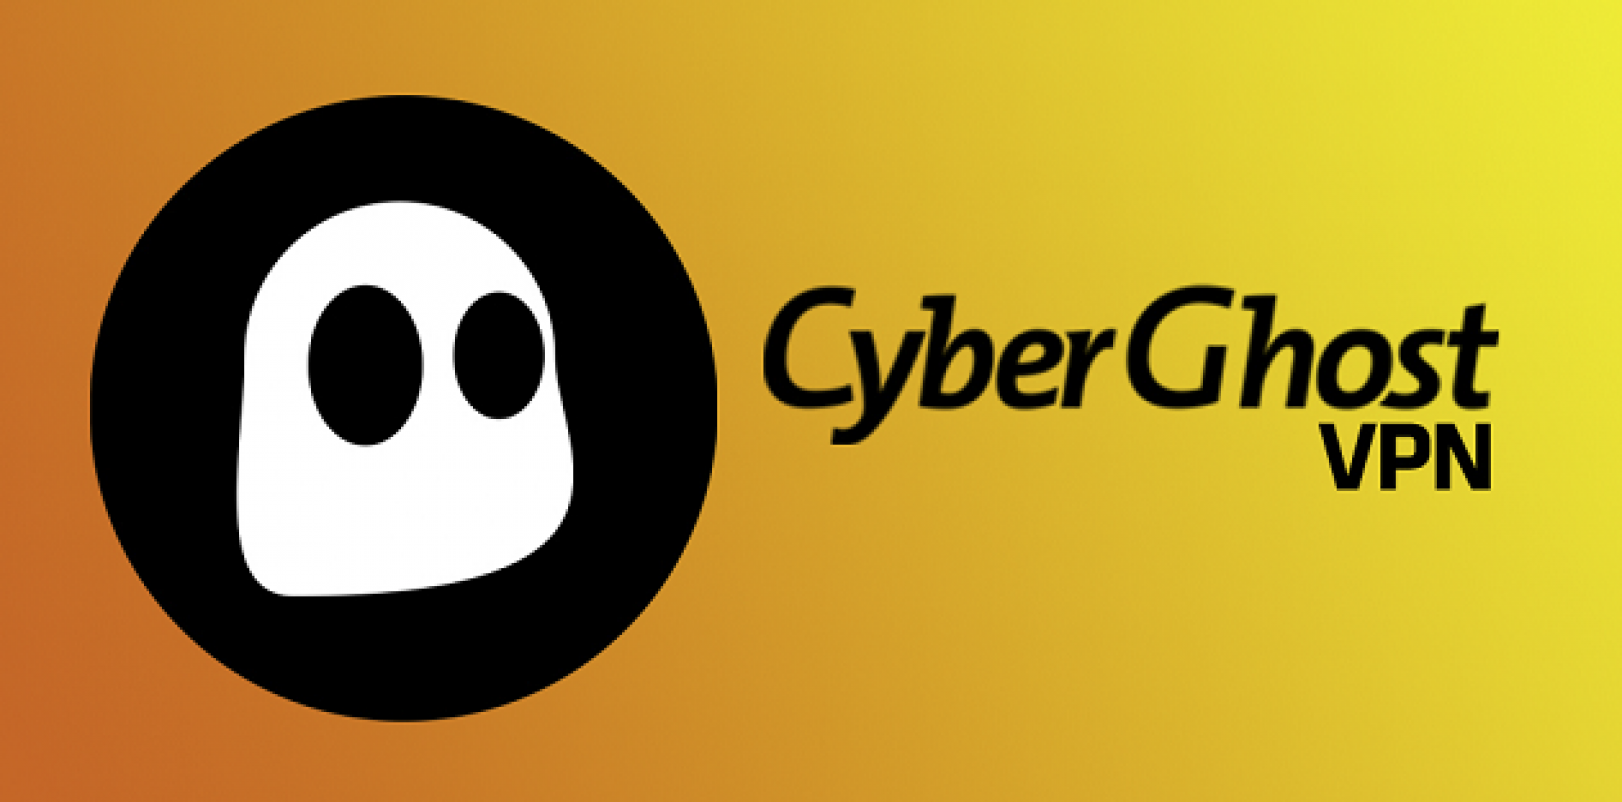 cyberghost good for torrenting